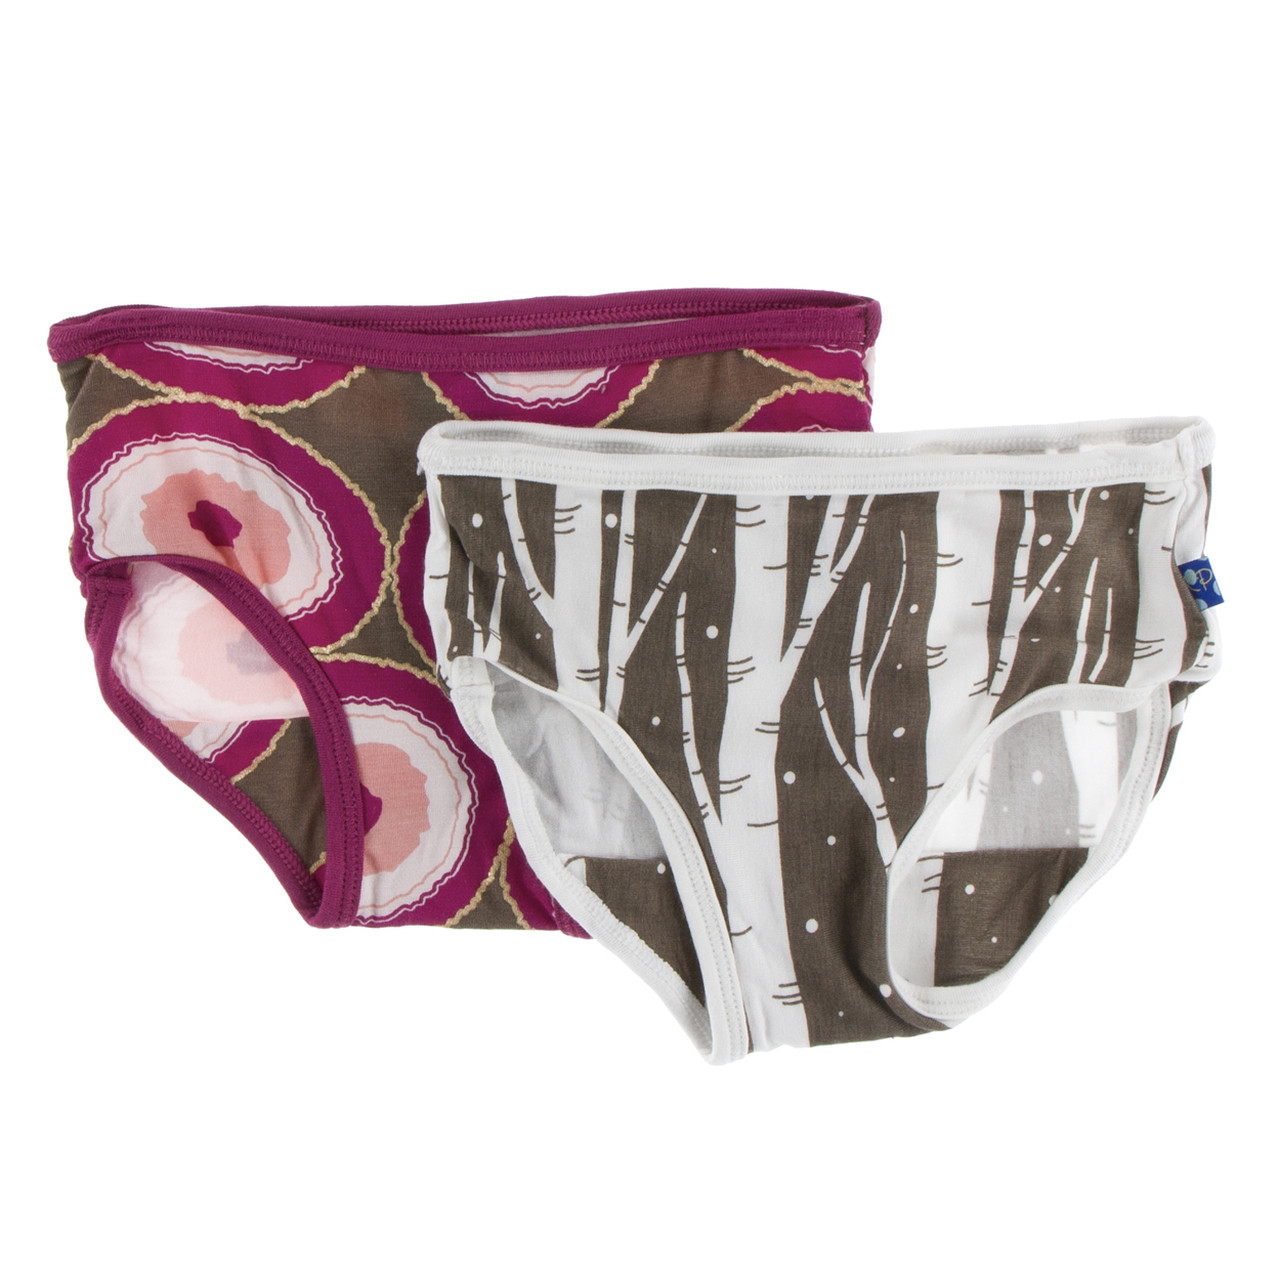 Kickee Pants Girl Underwear (Set of 2), Falcon Agate Slices